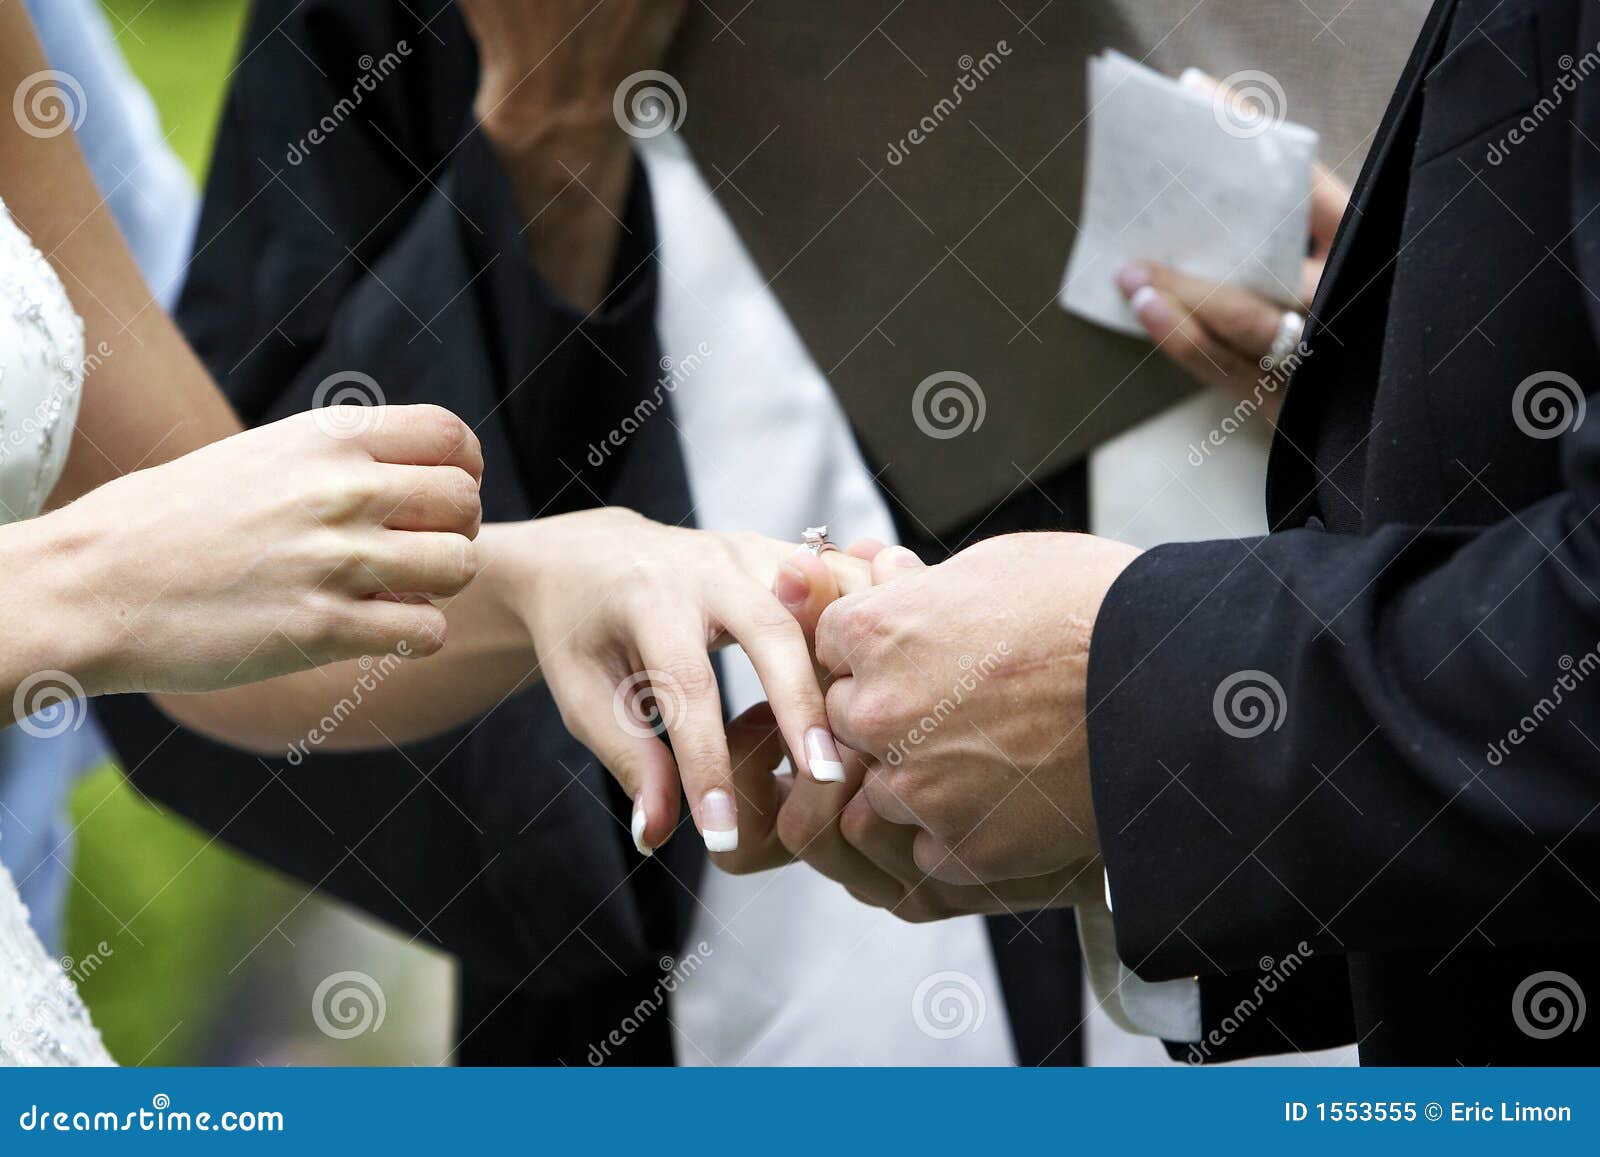 Putting the ring on the bride during a wedding ceremony.